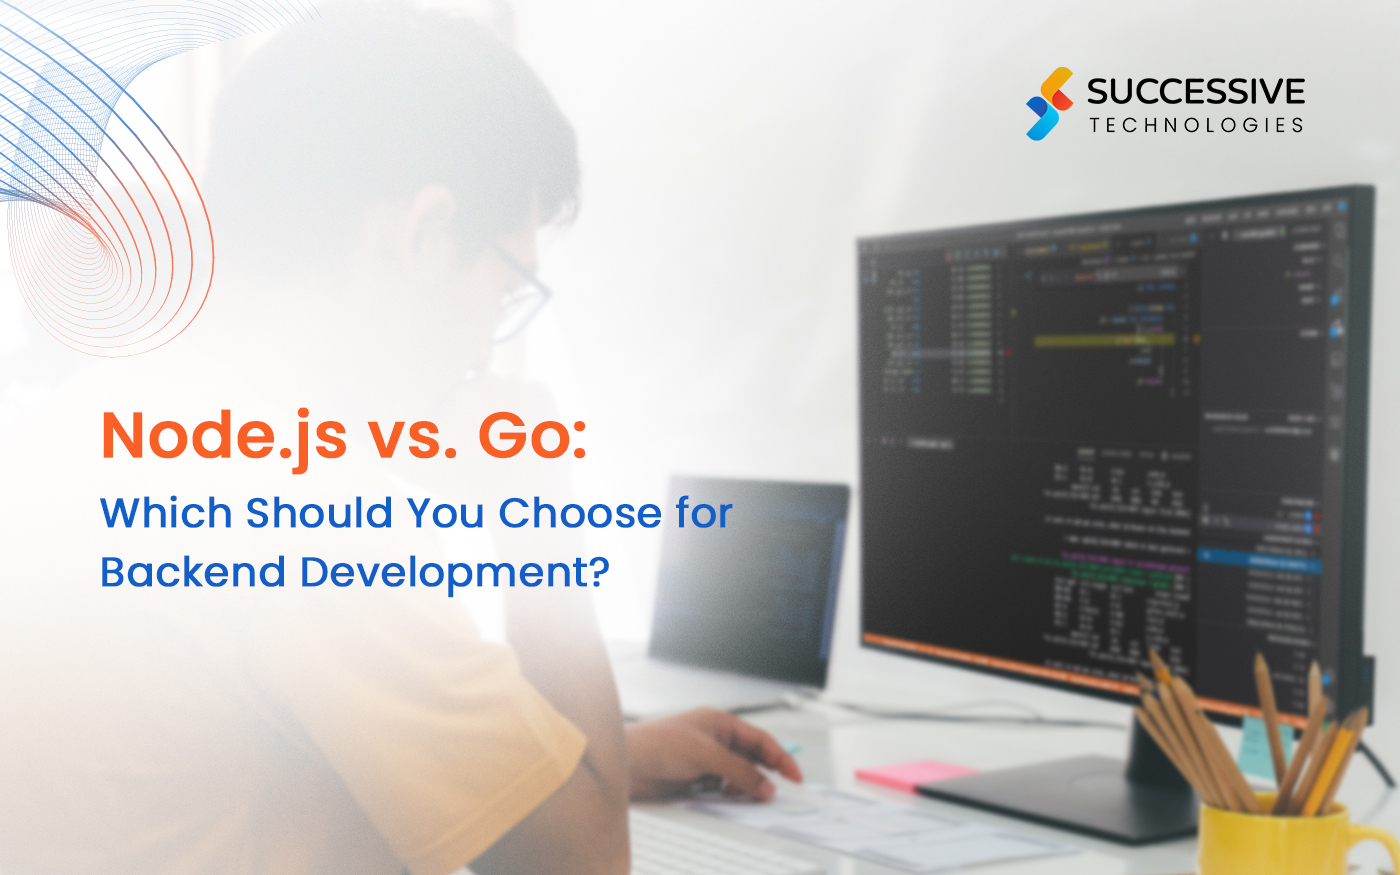 Node.js vs. Go: Which Should You Choose for Backend Development?